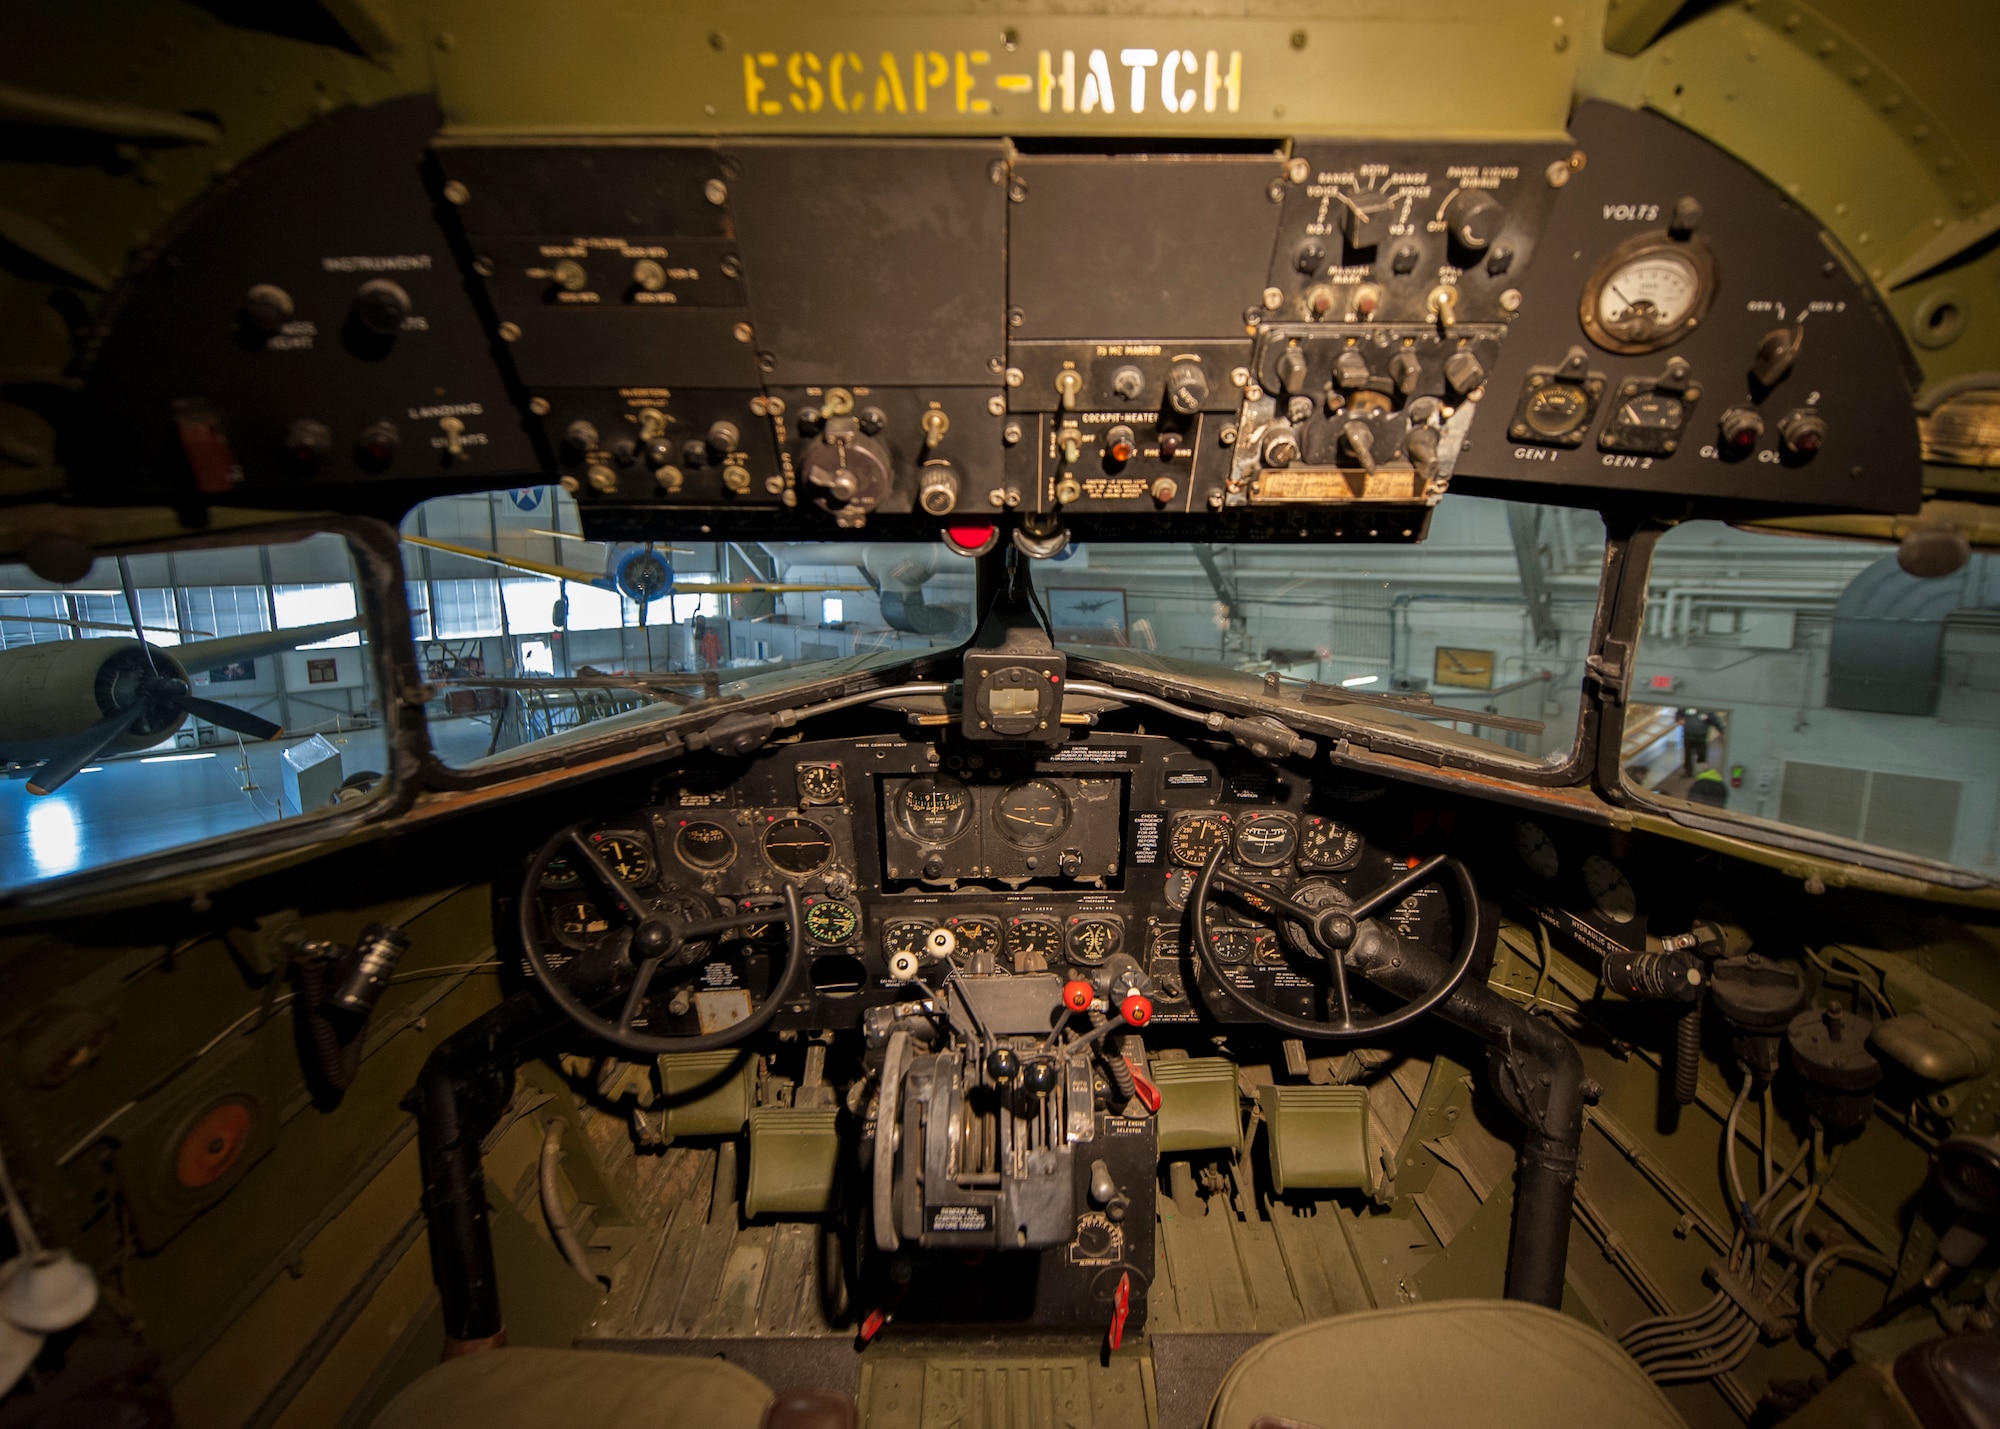 The cockpit of the C-47A Skytrain, the “Turf and Sport Special,” sits on display Nov. 15, 2014, inside the Air Mobility Command Museum on Dover Air Force Base, Del. This type of aircraft carried personnel and cargo, and in a combat role, towed troop-carrying gliders and dropped paratroopers into enemy territory. (U.S. Air Force photo/Airman 1st Class Zachary Cacicia)